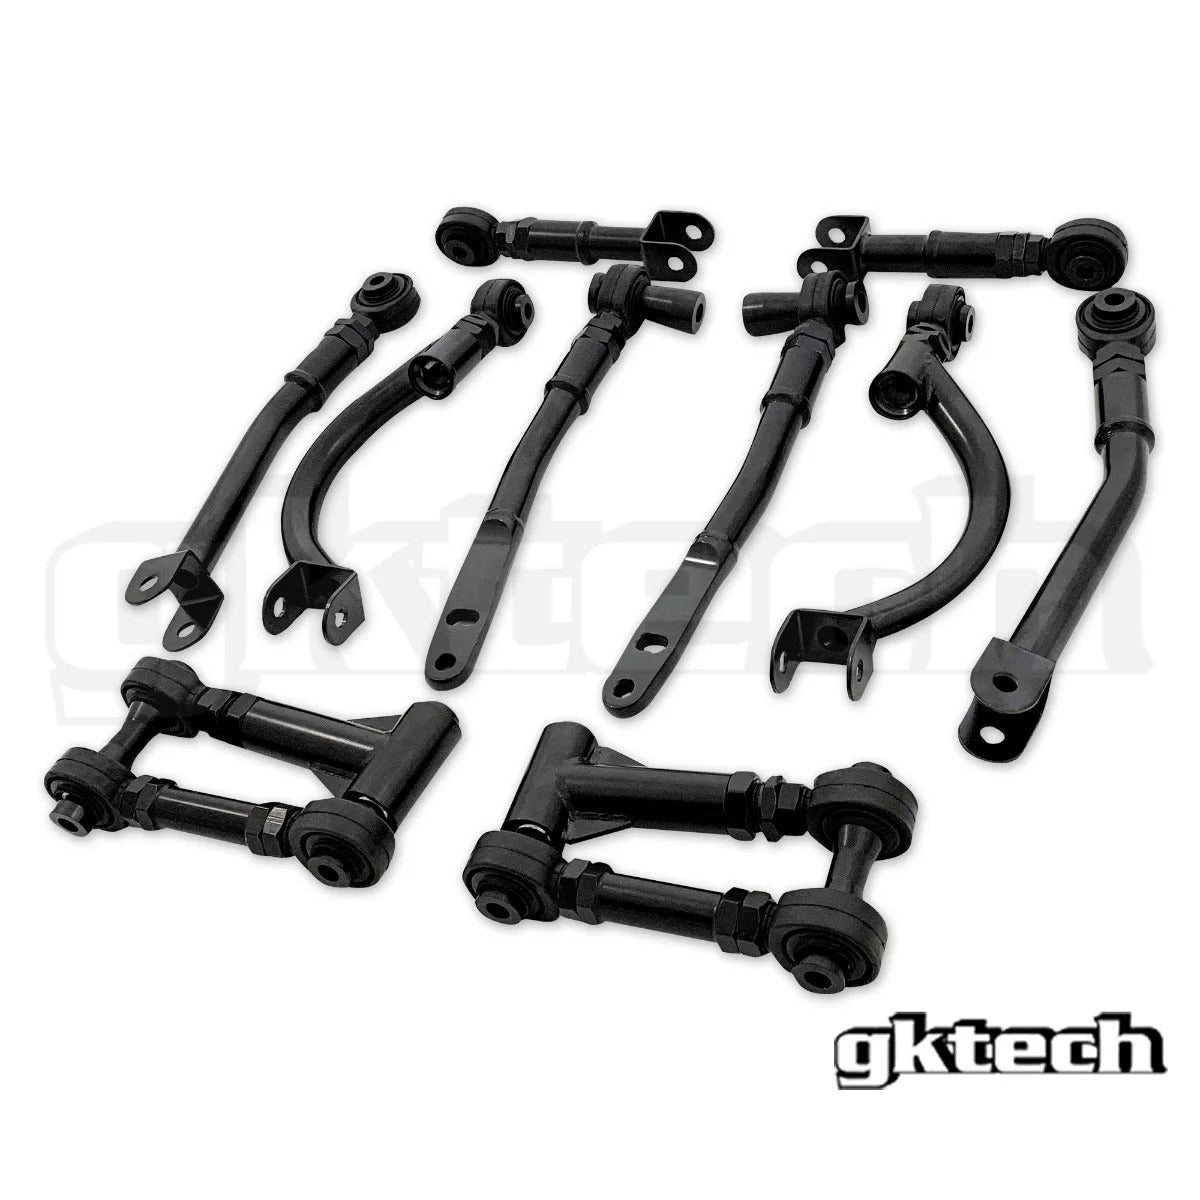 V4 - R32 Skyline Suspension arm package (10% combo discount)